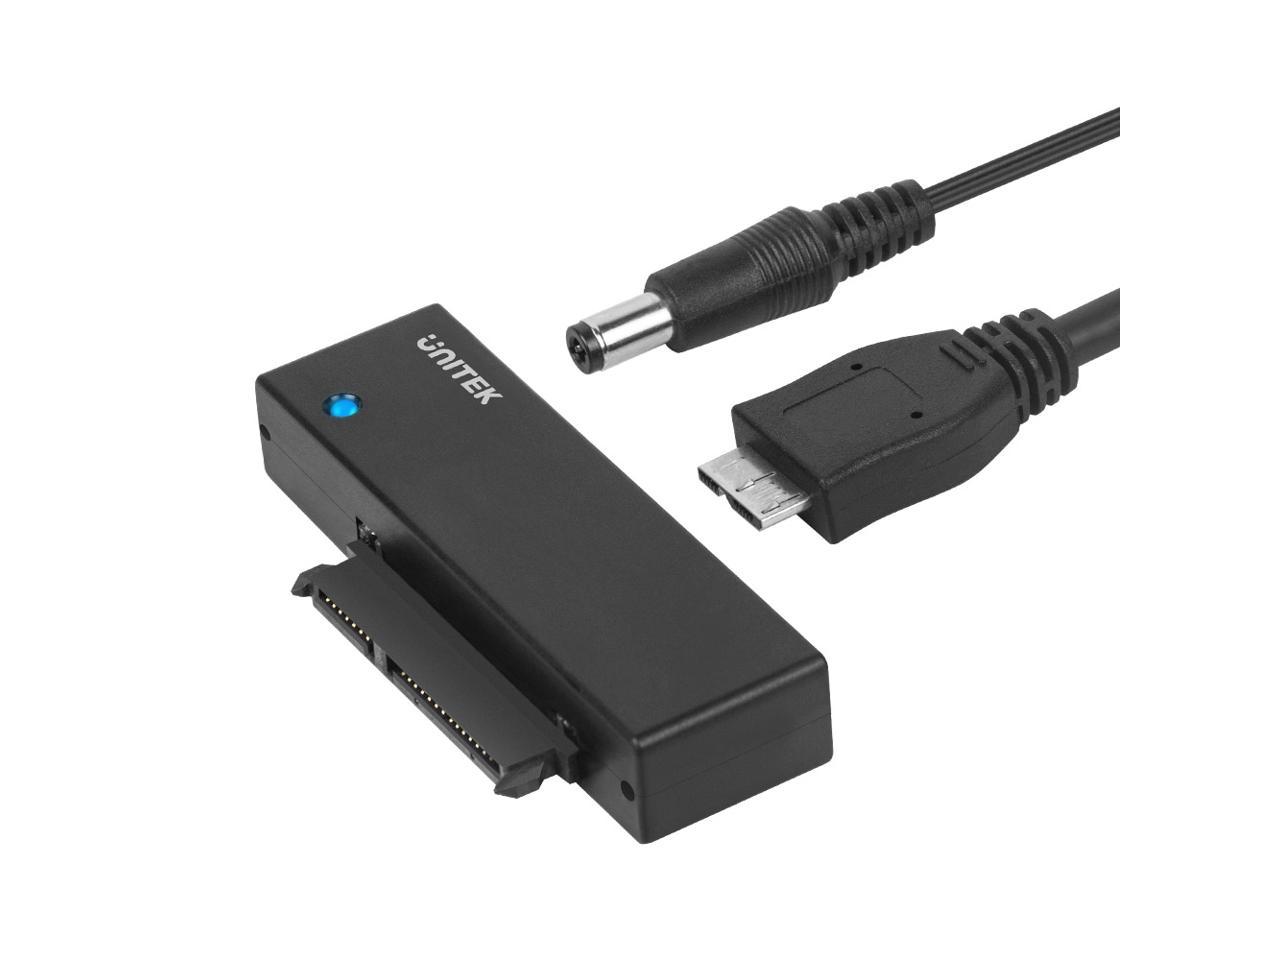 Unitek USB to SATA III Hard Drive Converter Cable for 3.5 Inch Hard Drive Disk with 12V/2A Power Adapter, Support UASP - Newegg.com